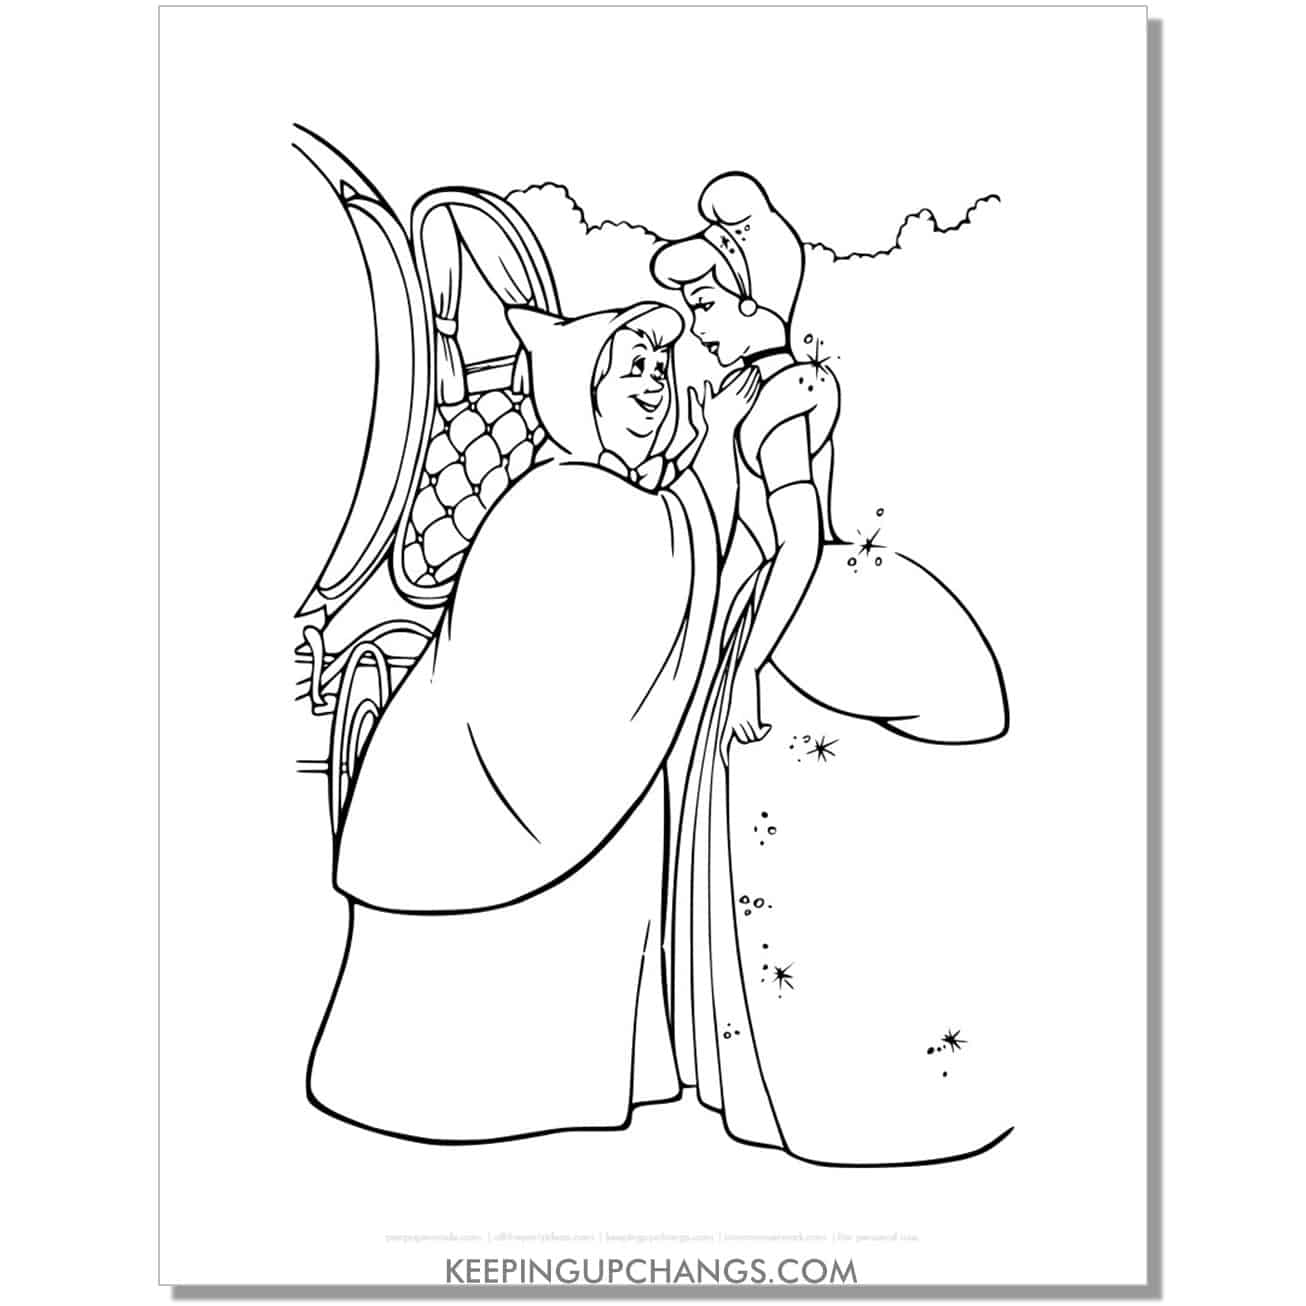 cinderella outside carriage with fairy godmother coloring page, sheet.